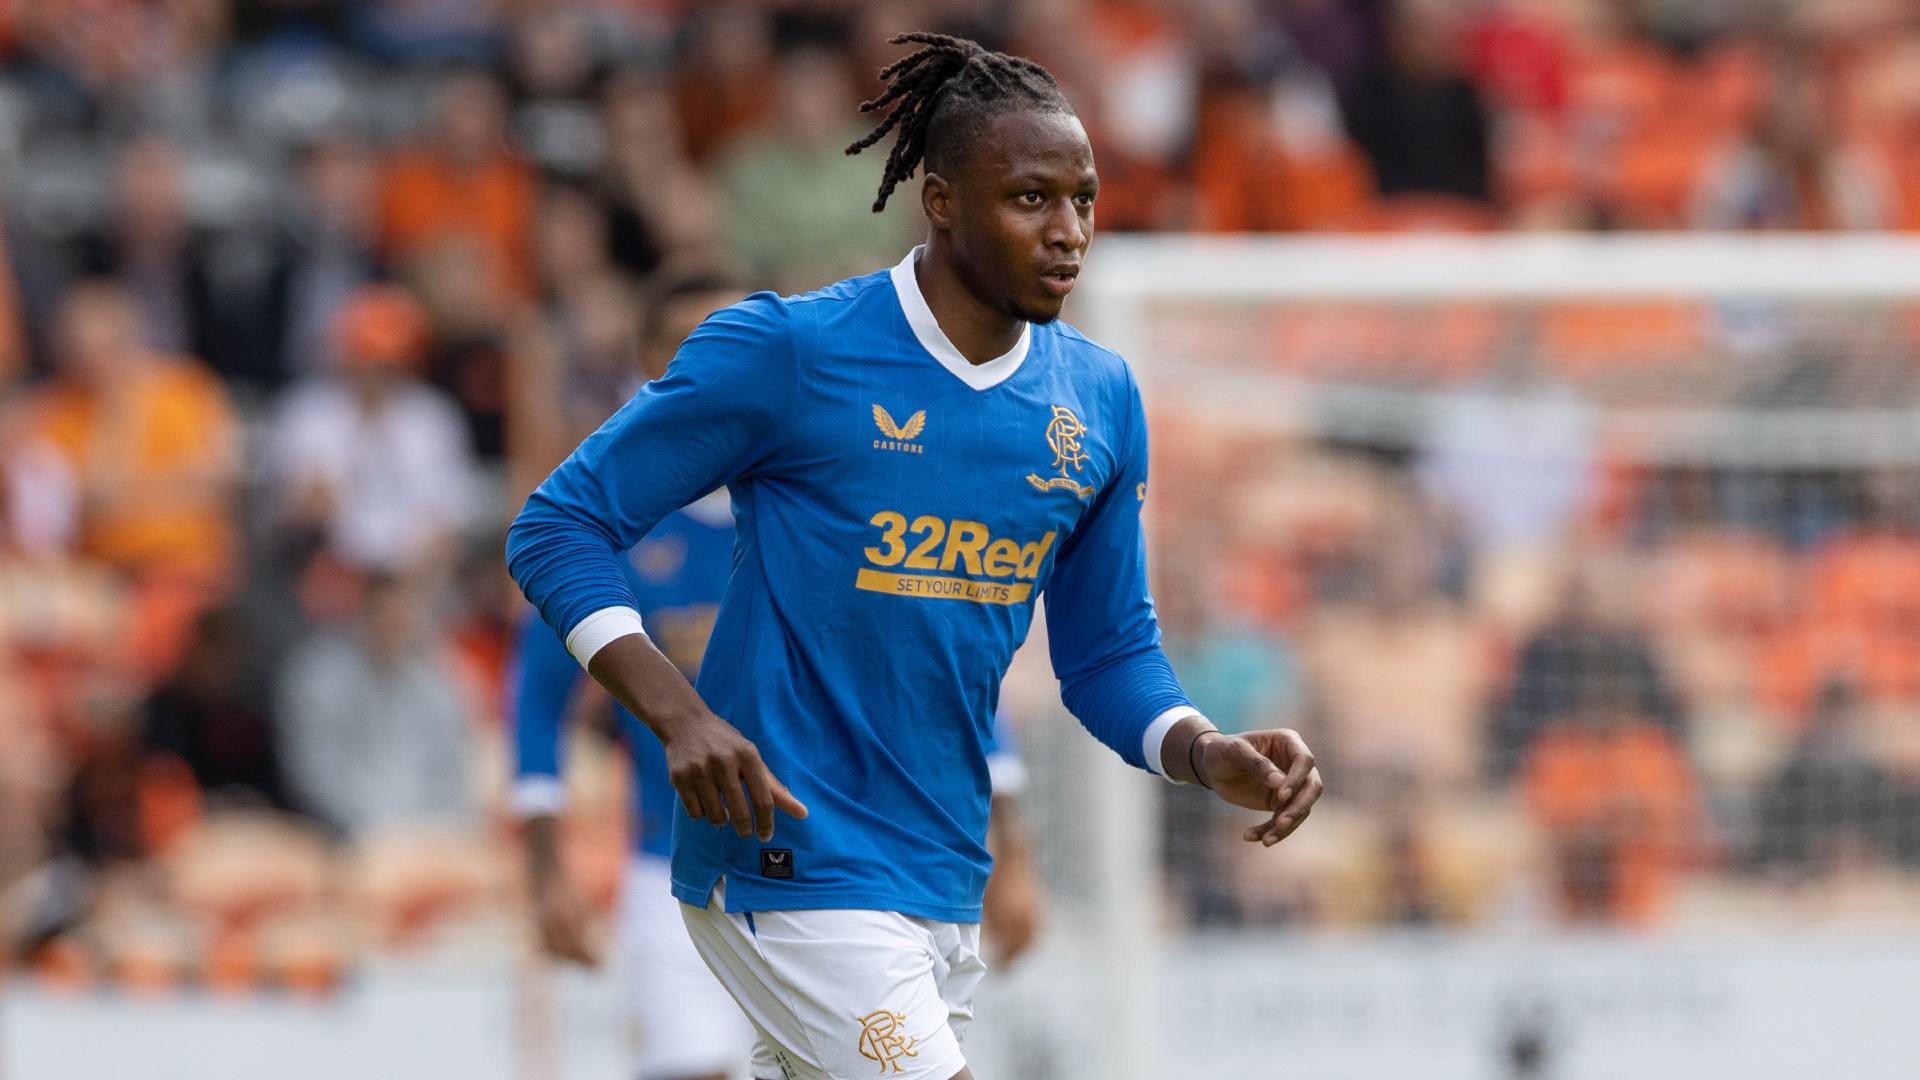 Gerrard to Aribo: 'You are better player when you play angry for Rangers'